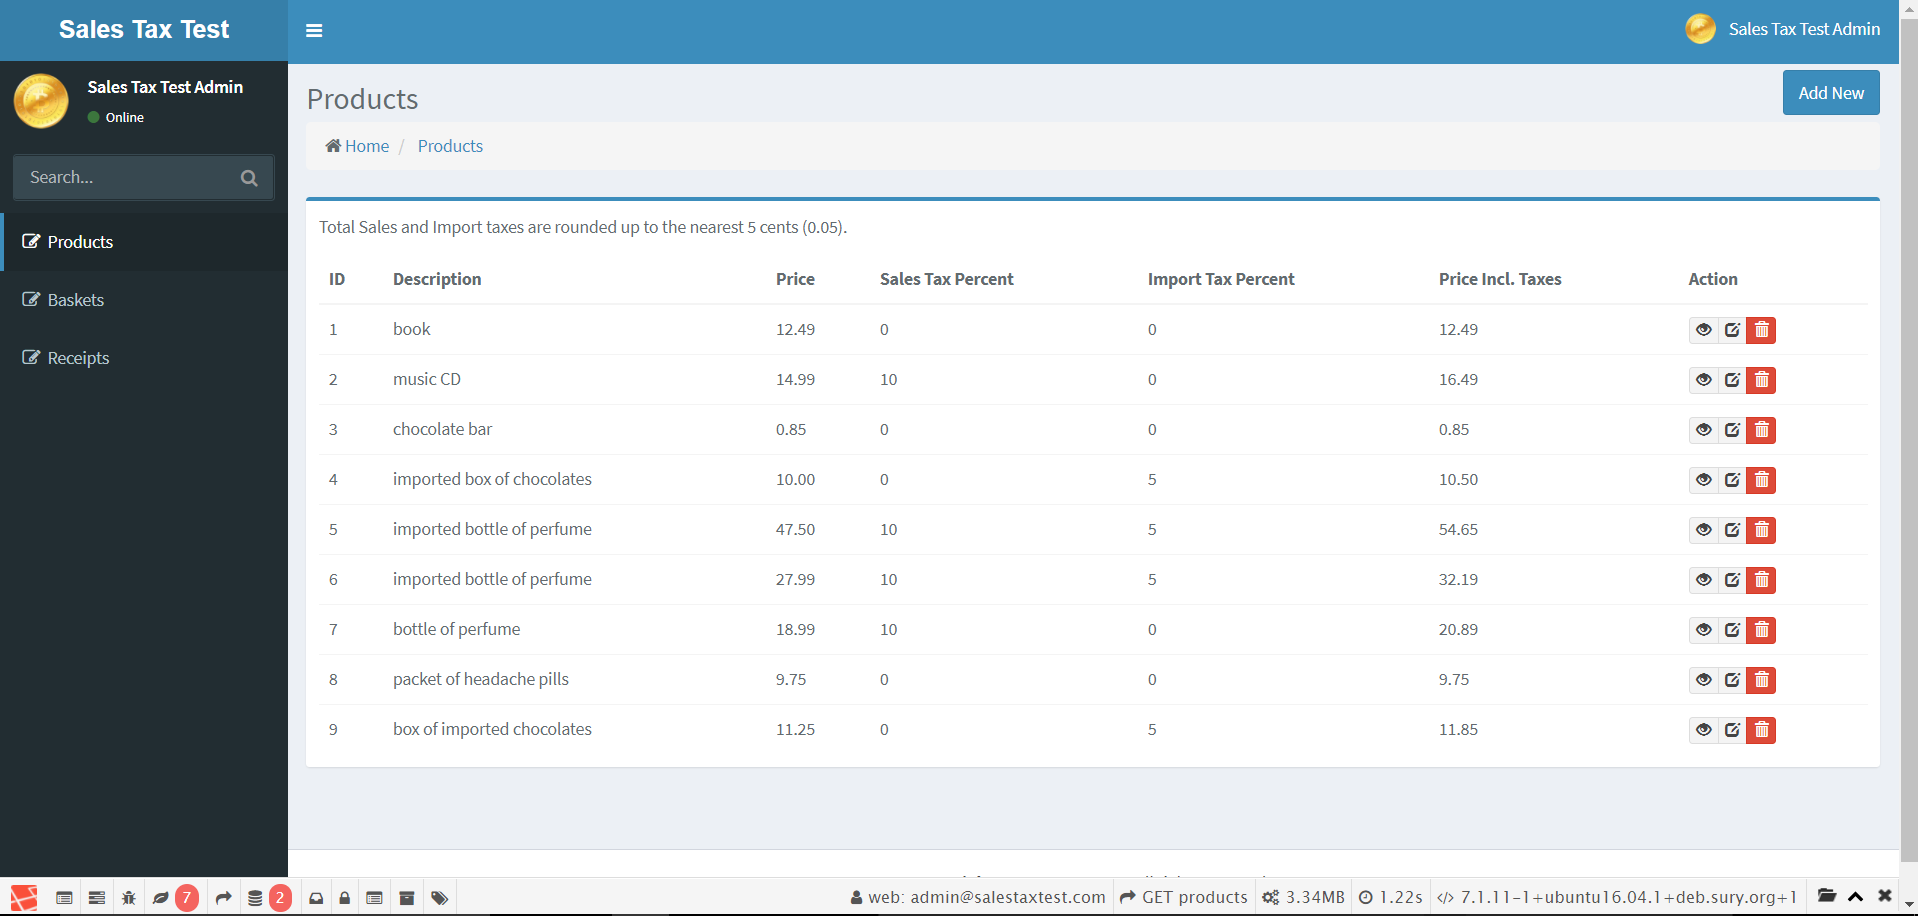 View of products page as logged in user